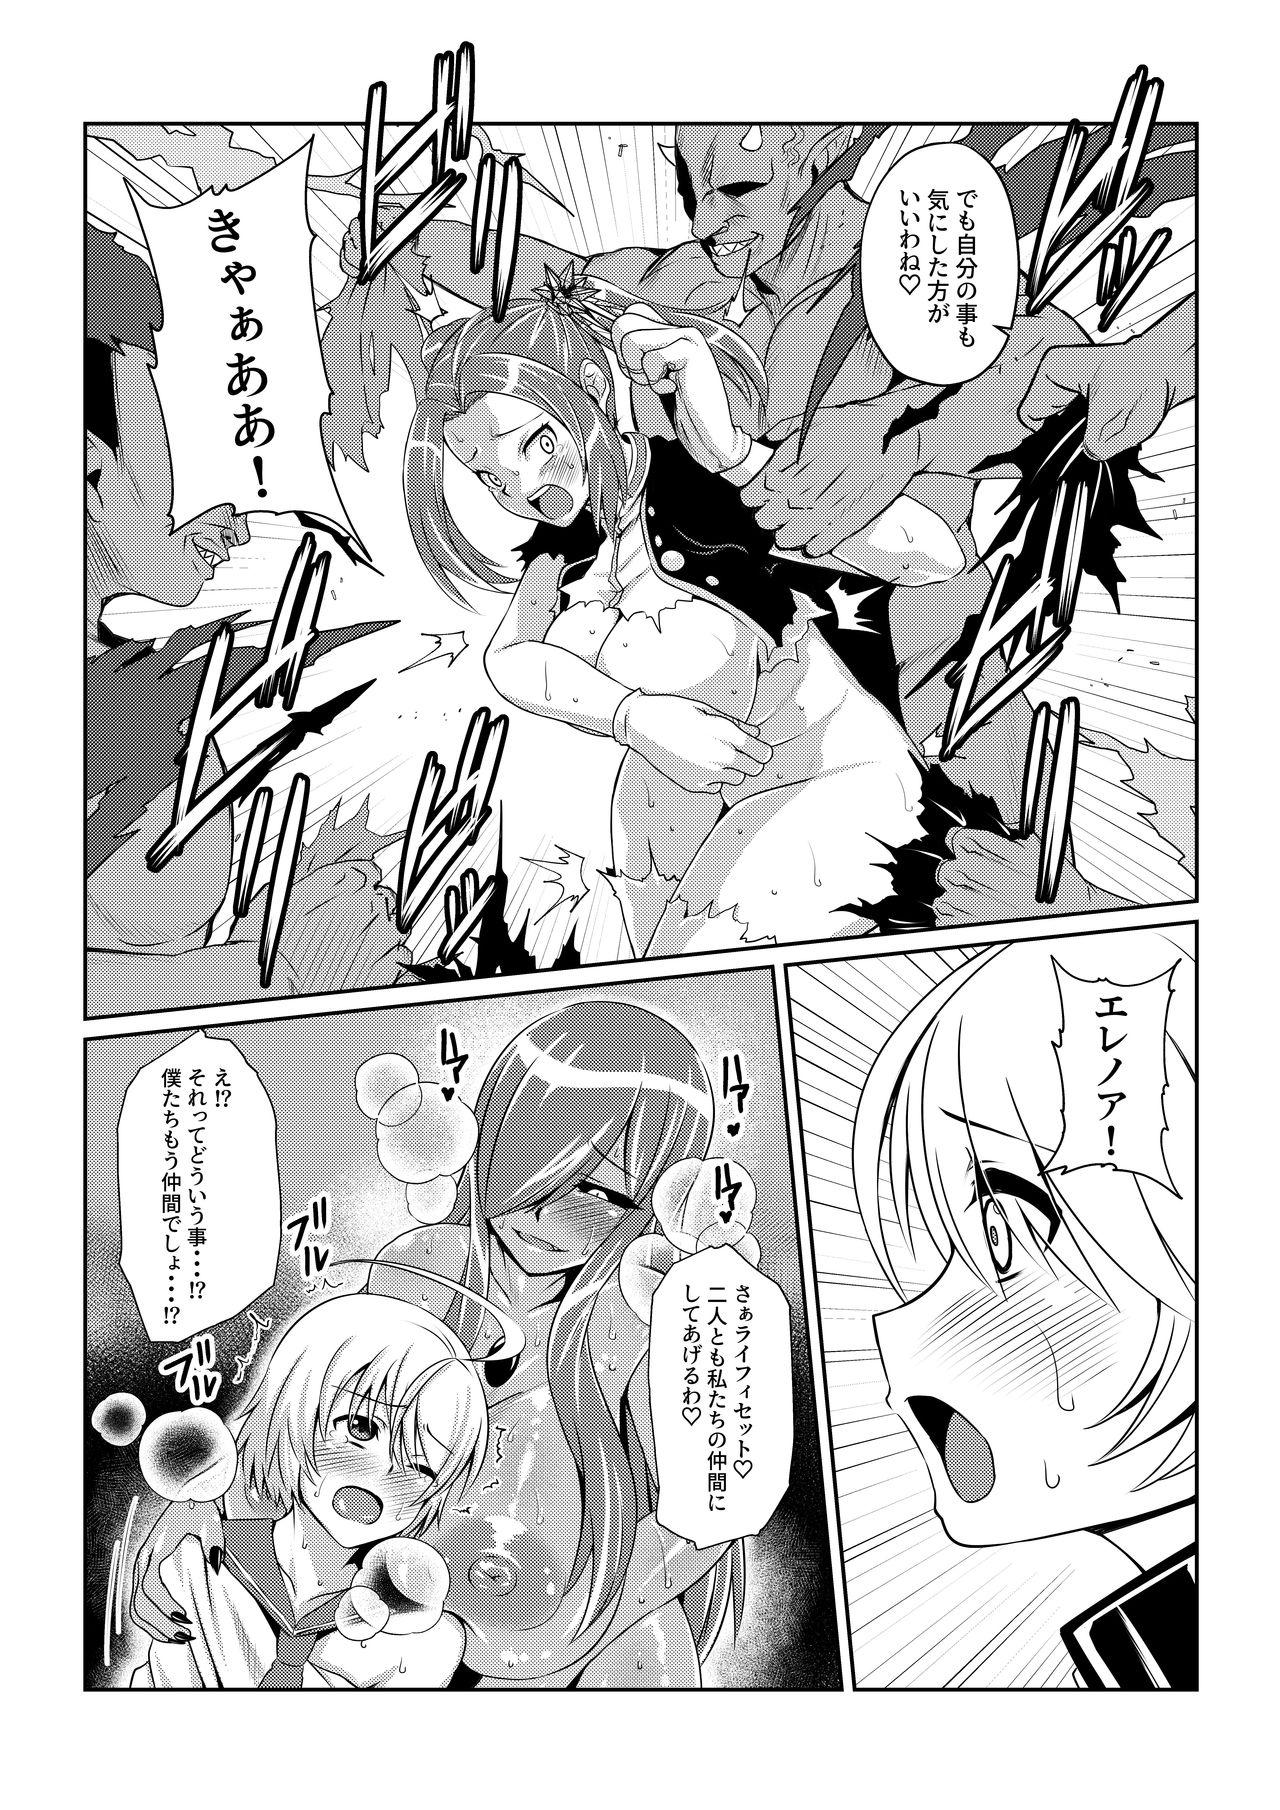 Sex Party Tales Of DarkSide〜性隷〜 - Tales of Indo - Page 6